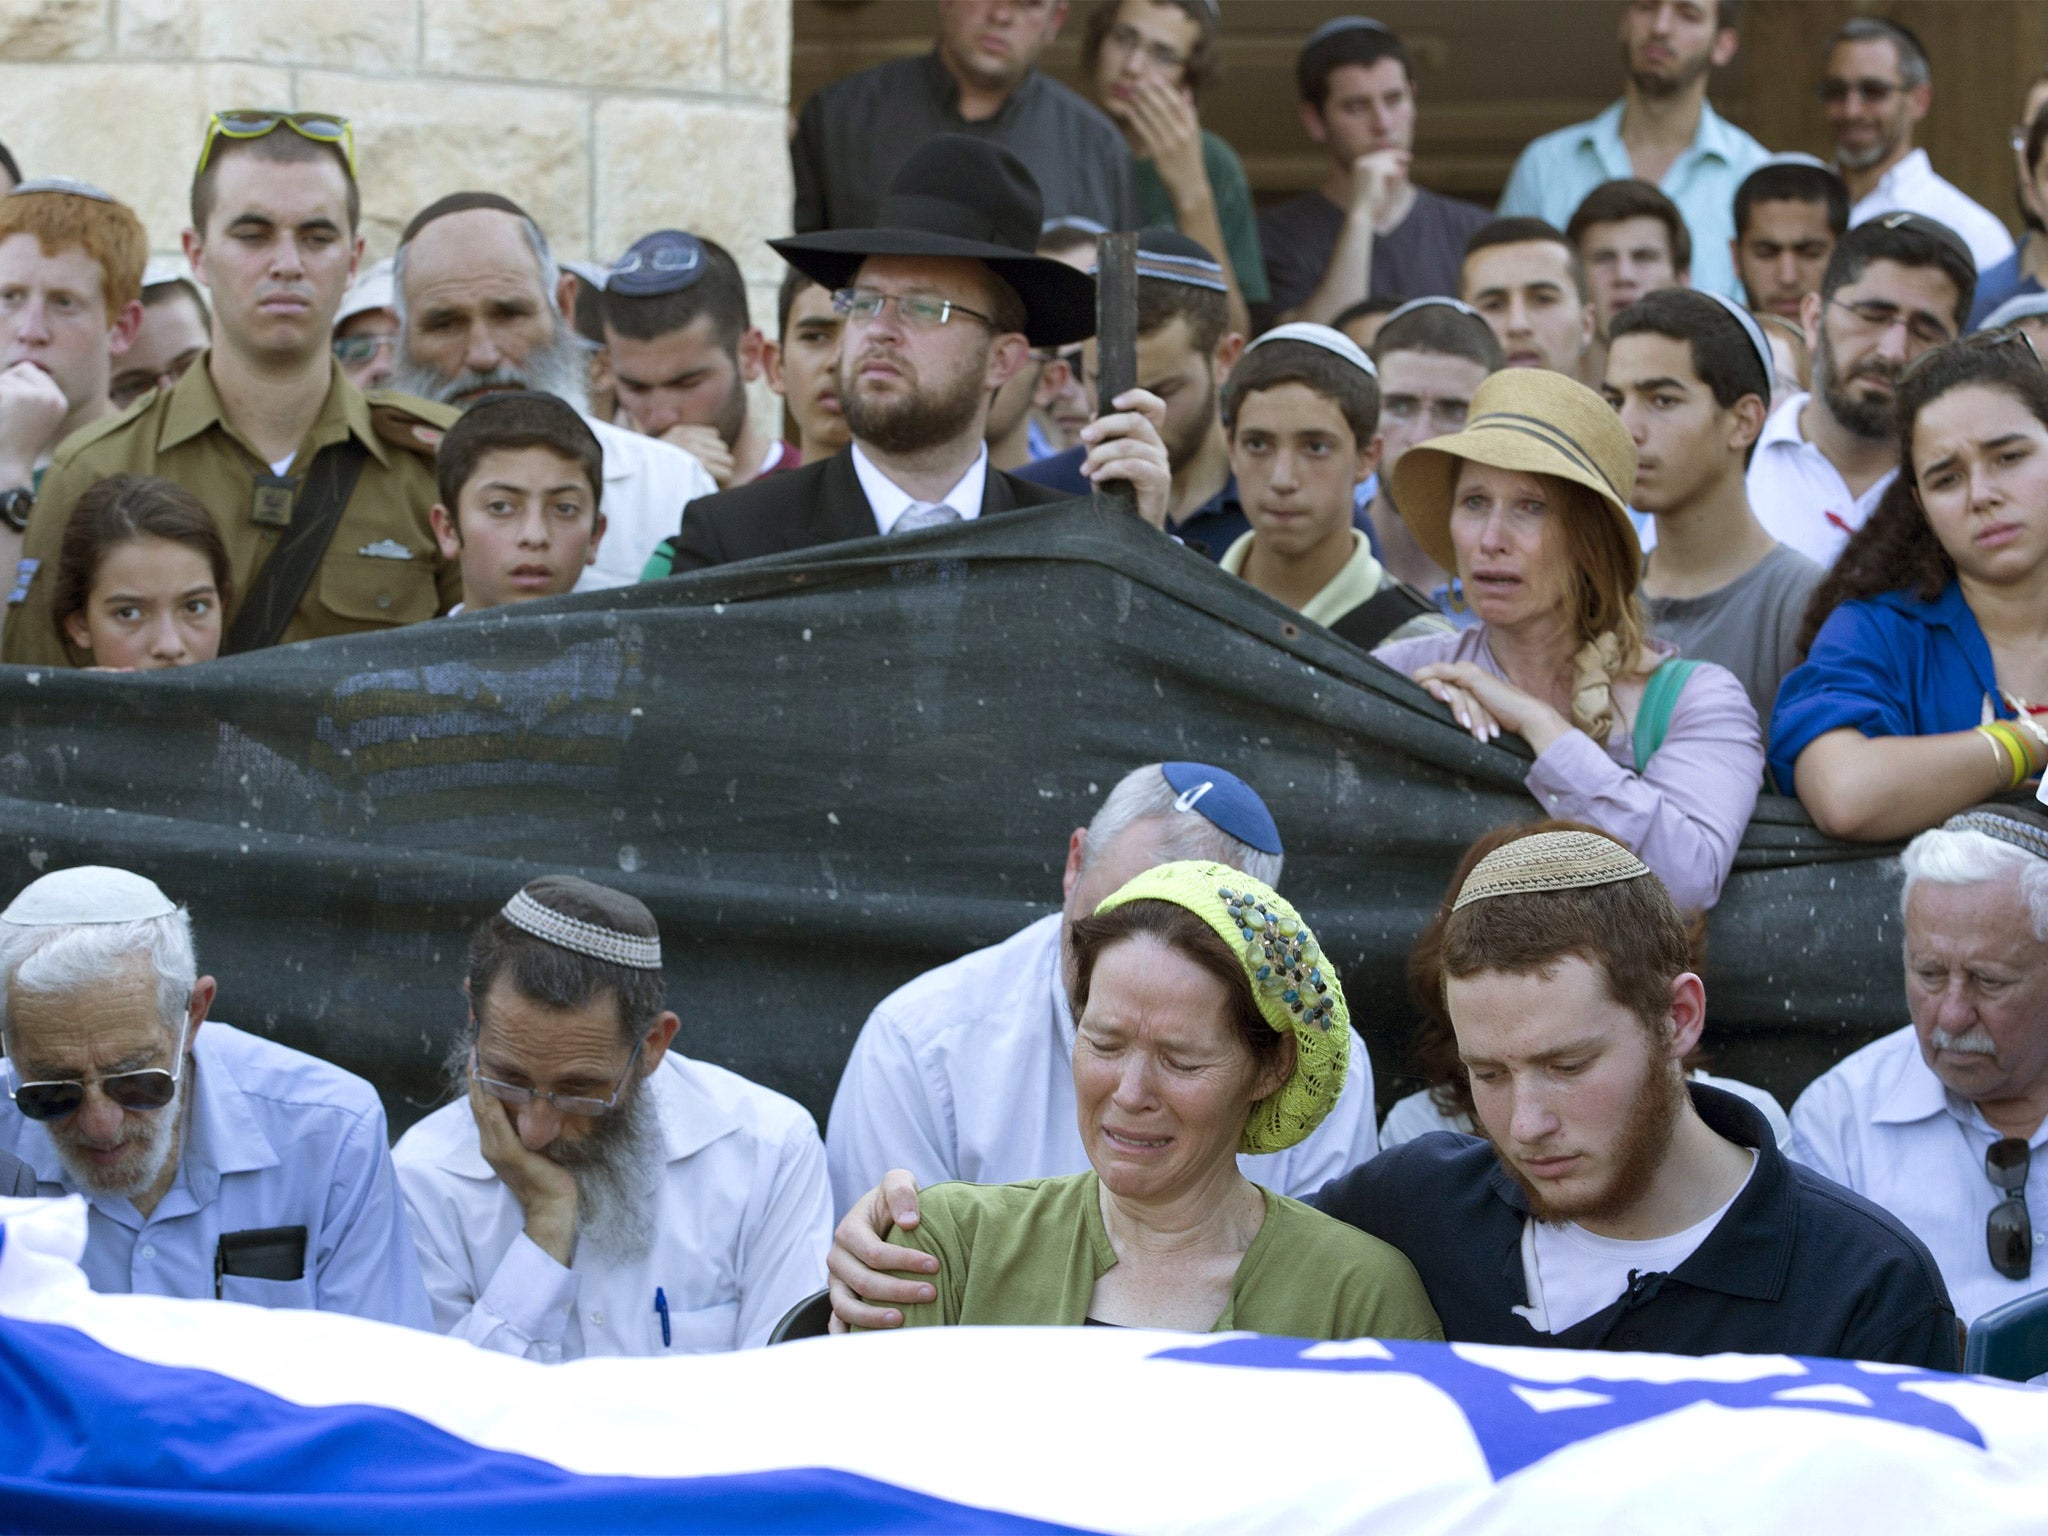 Avi and Rachel Fraenkel attend the funeral of their son, Naftali, a 16-year-old with dual Israeli-American citizenship, in their town of Nof Ayalon